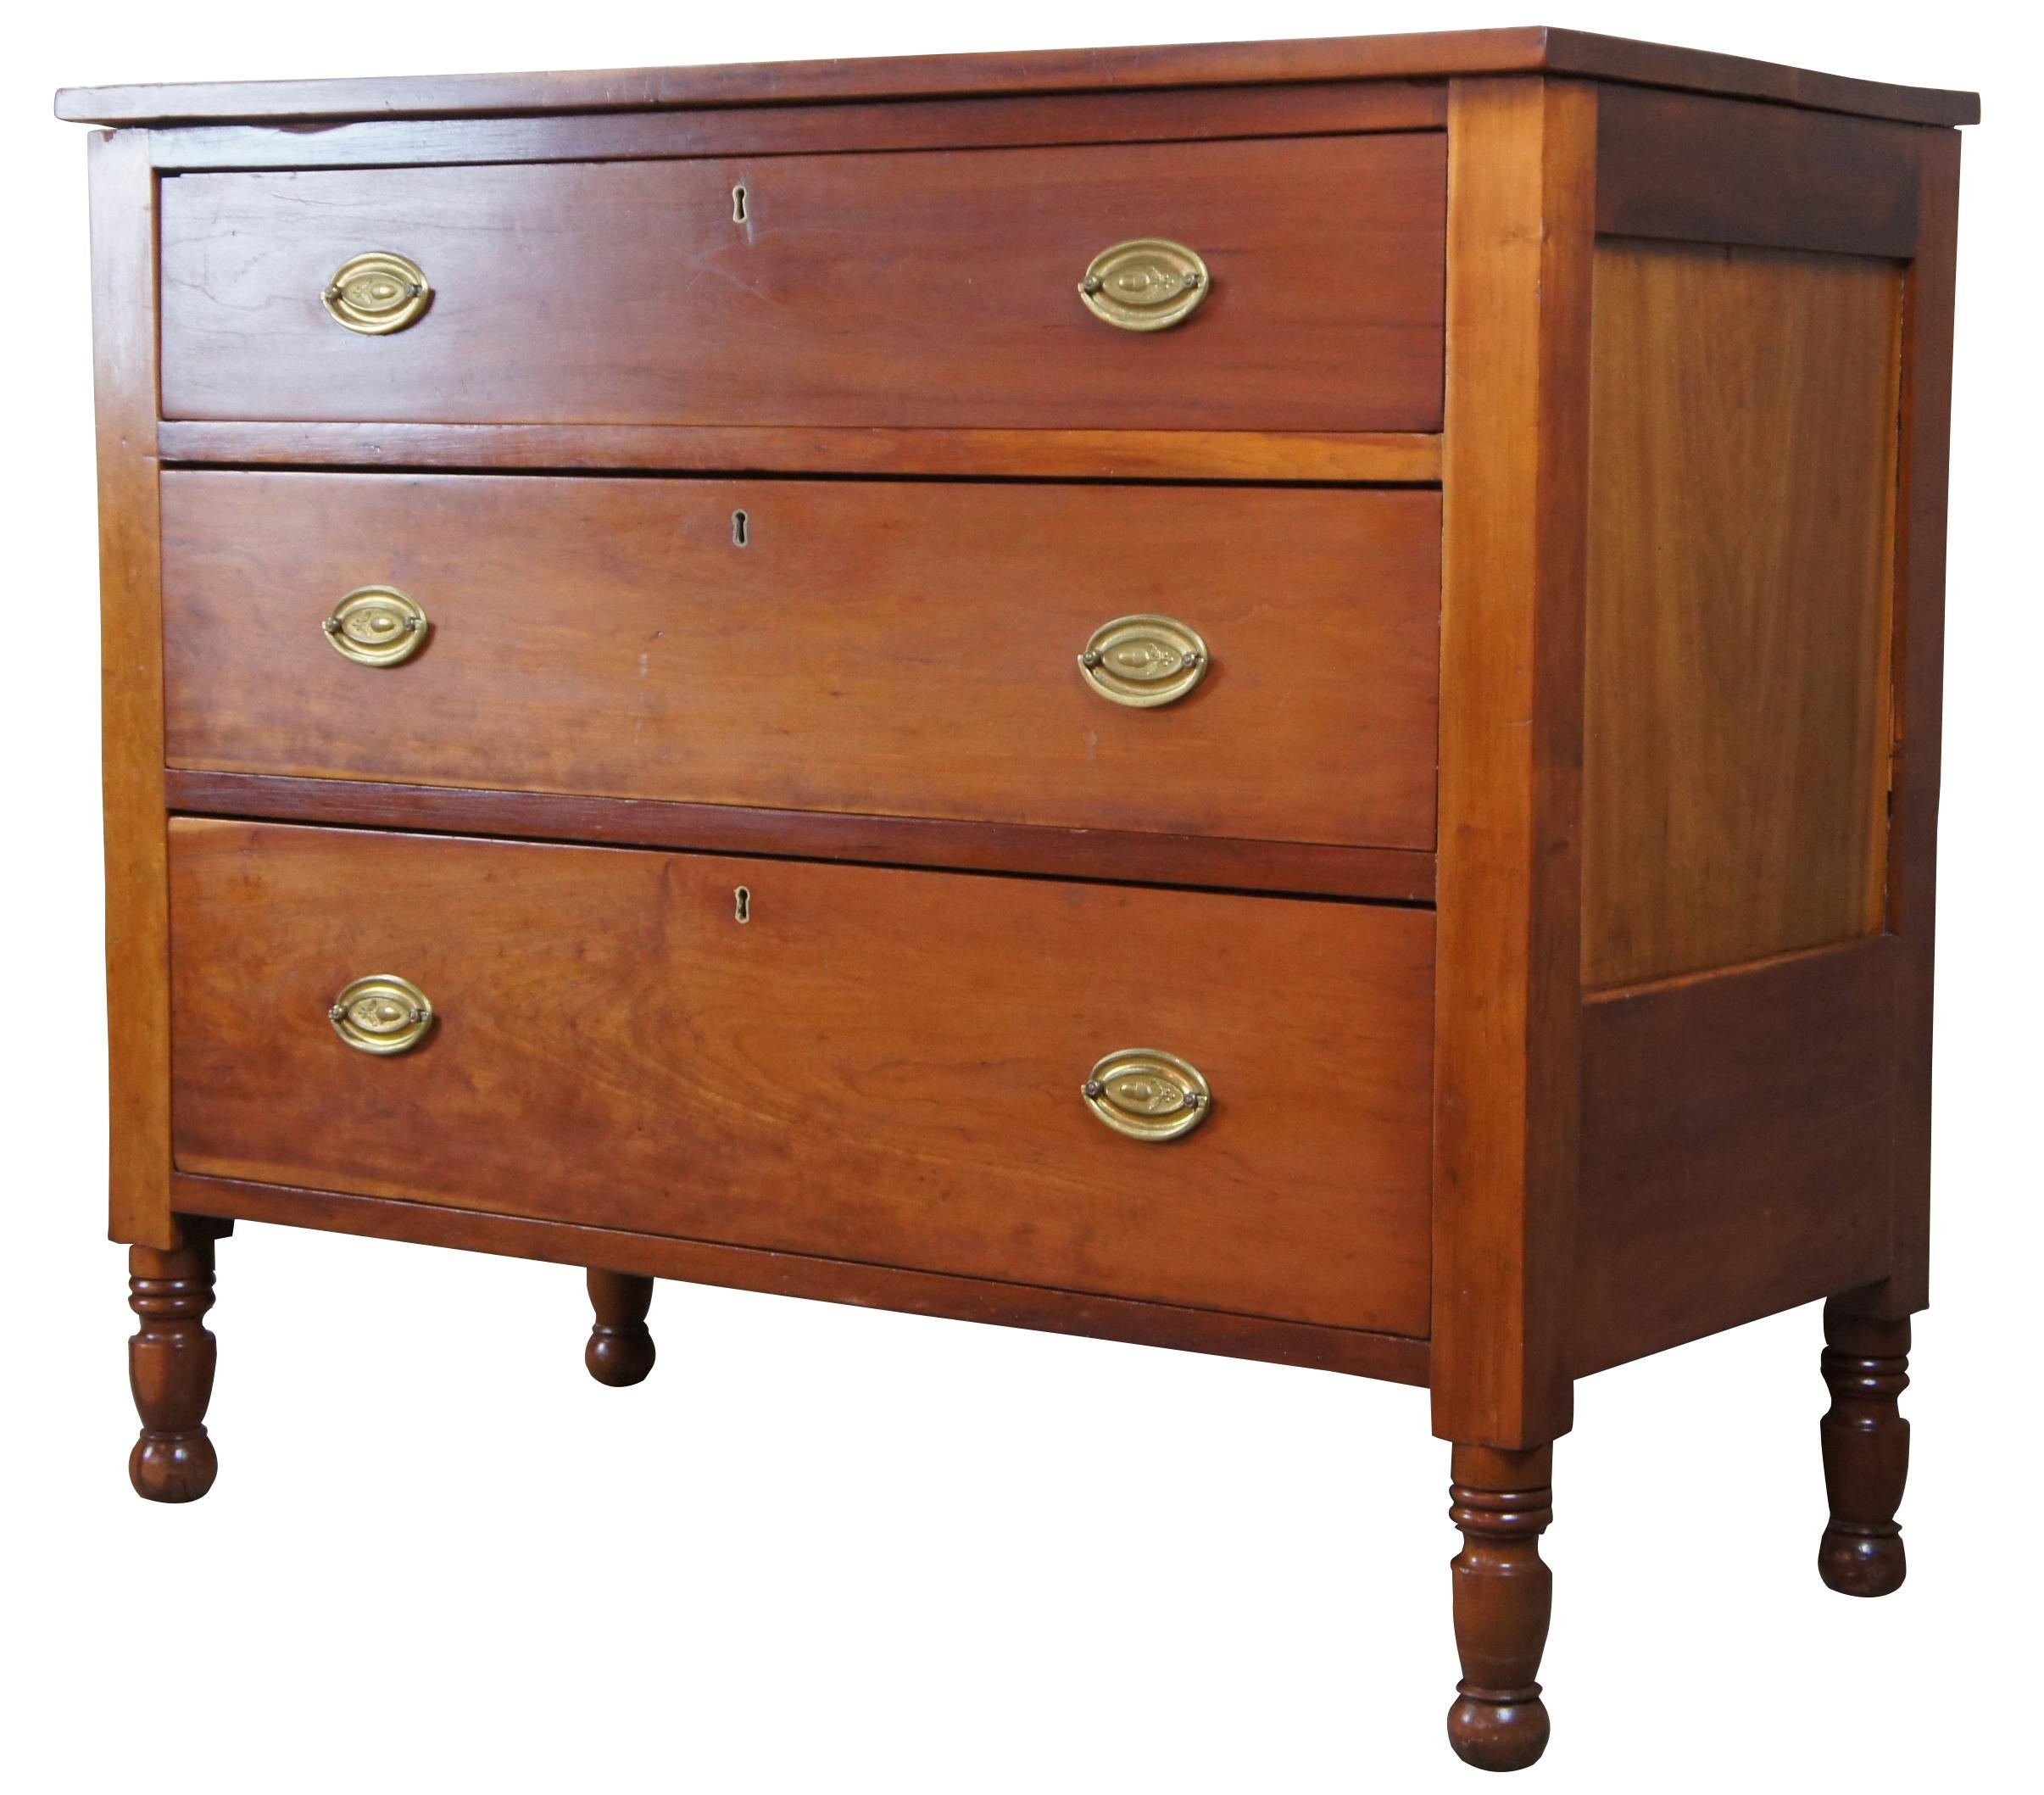 Antique Sheraton chest of drawers. Made from cherry with a rectangular form. Features three hand dovetailed drawers and turned nub feet.
 